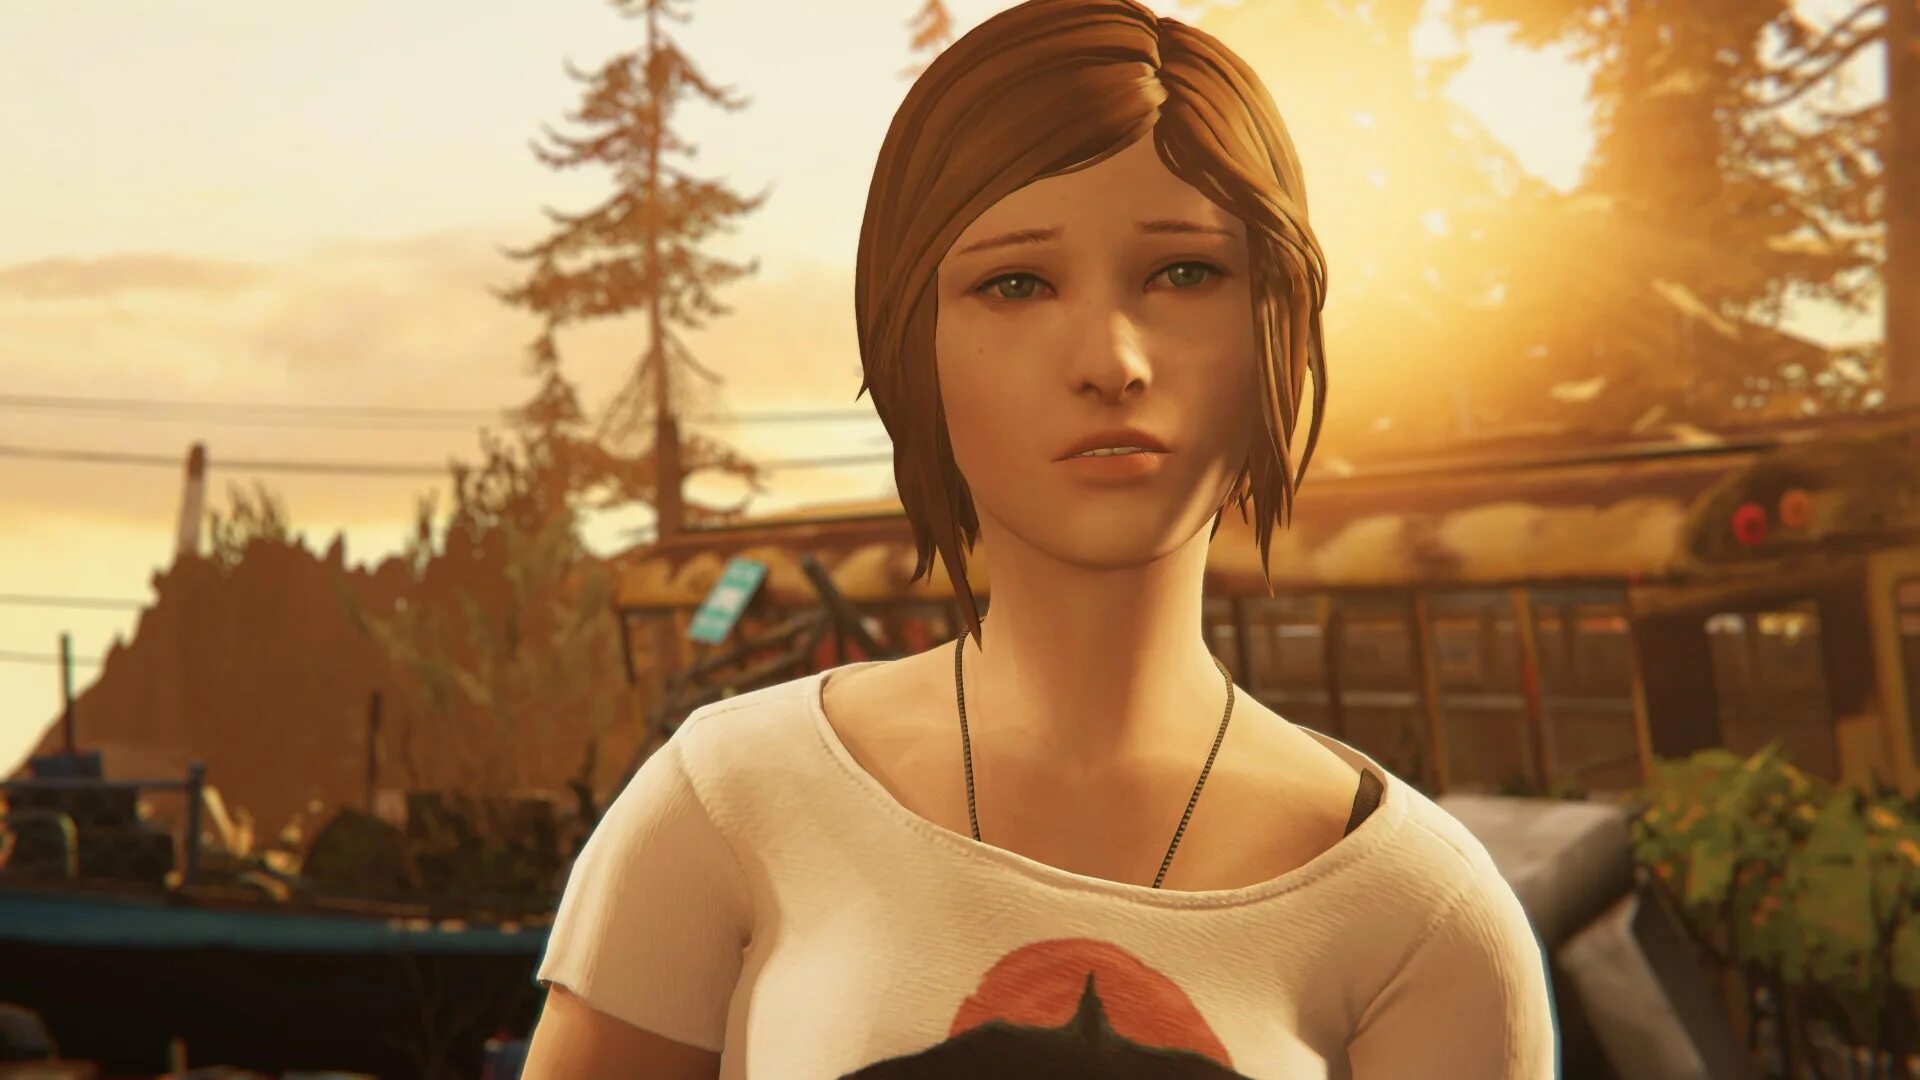 Life is warmed. Life is Strange before the Storm ремастер. Life is Strange Remastered collection. Life is Strange before the Storm Remastered Скриншоты.